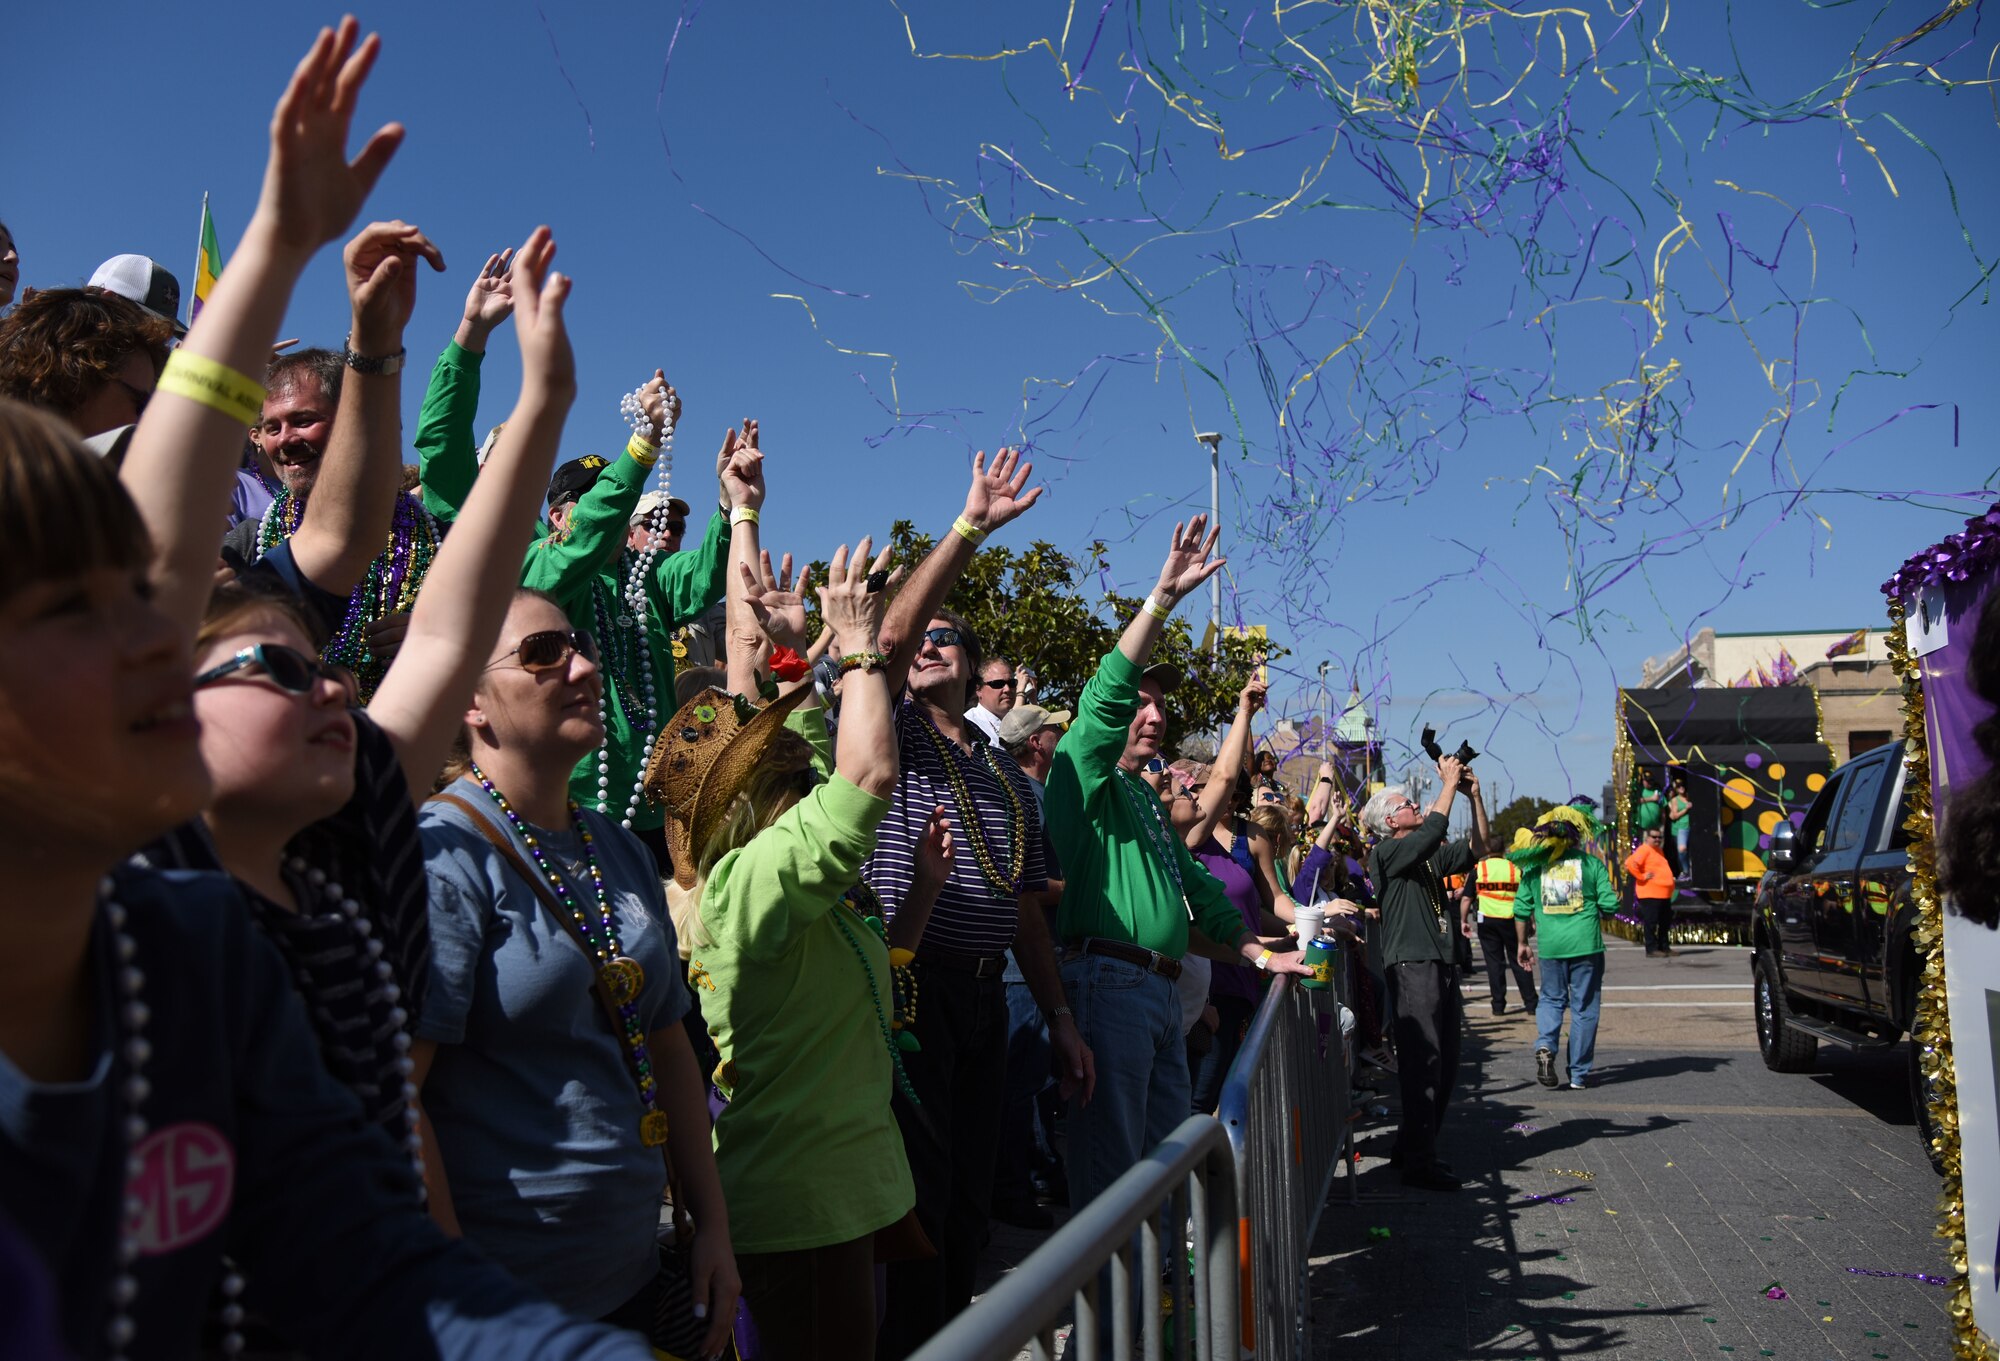 Parade attendees cheer during the Gulf Coast Carnival Association Mardi Gras parade Feb. 13, 2018, in Biloxi, Mississippi. Keesler personnel participate in local parades every Mardi Gras season to show their support of the communities surrounding the installation. (U.S. Air Force photo by Kemberly Groue)